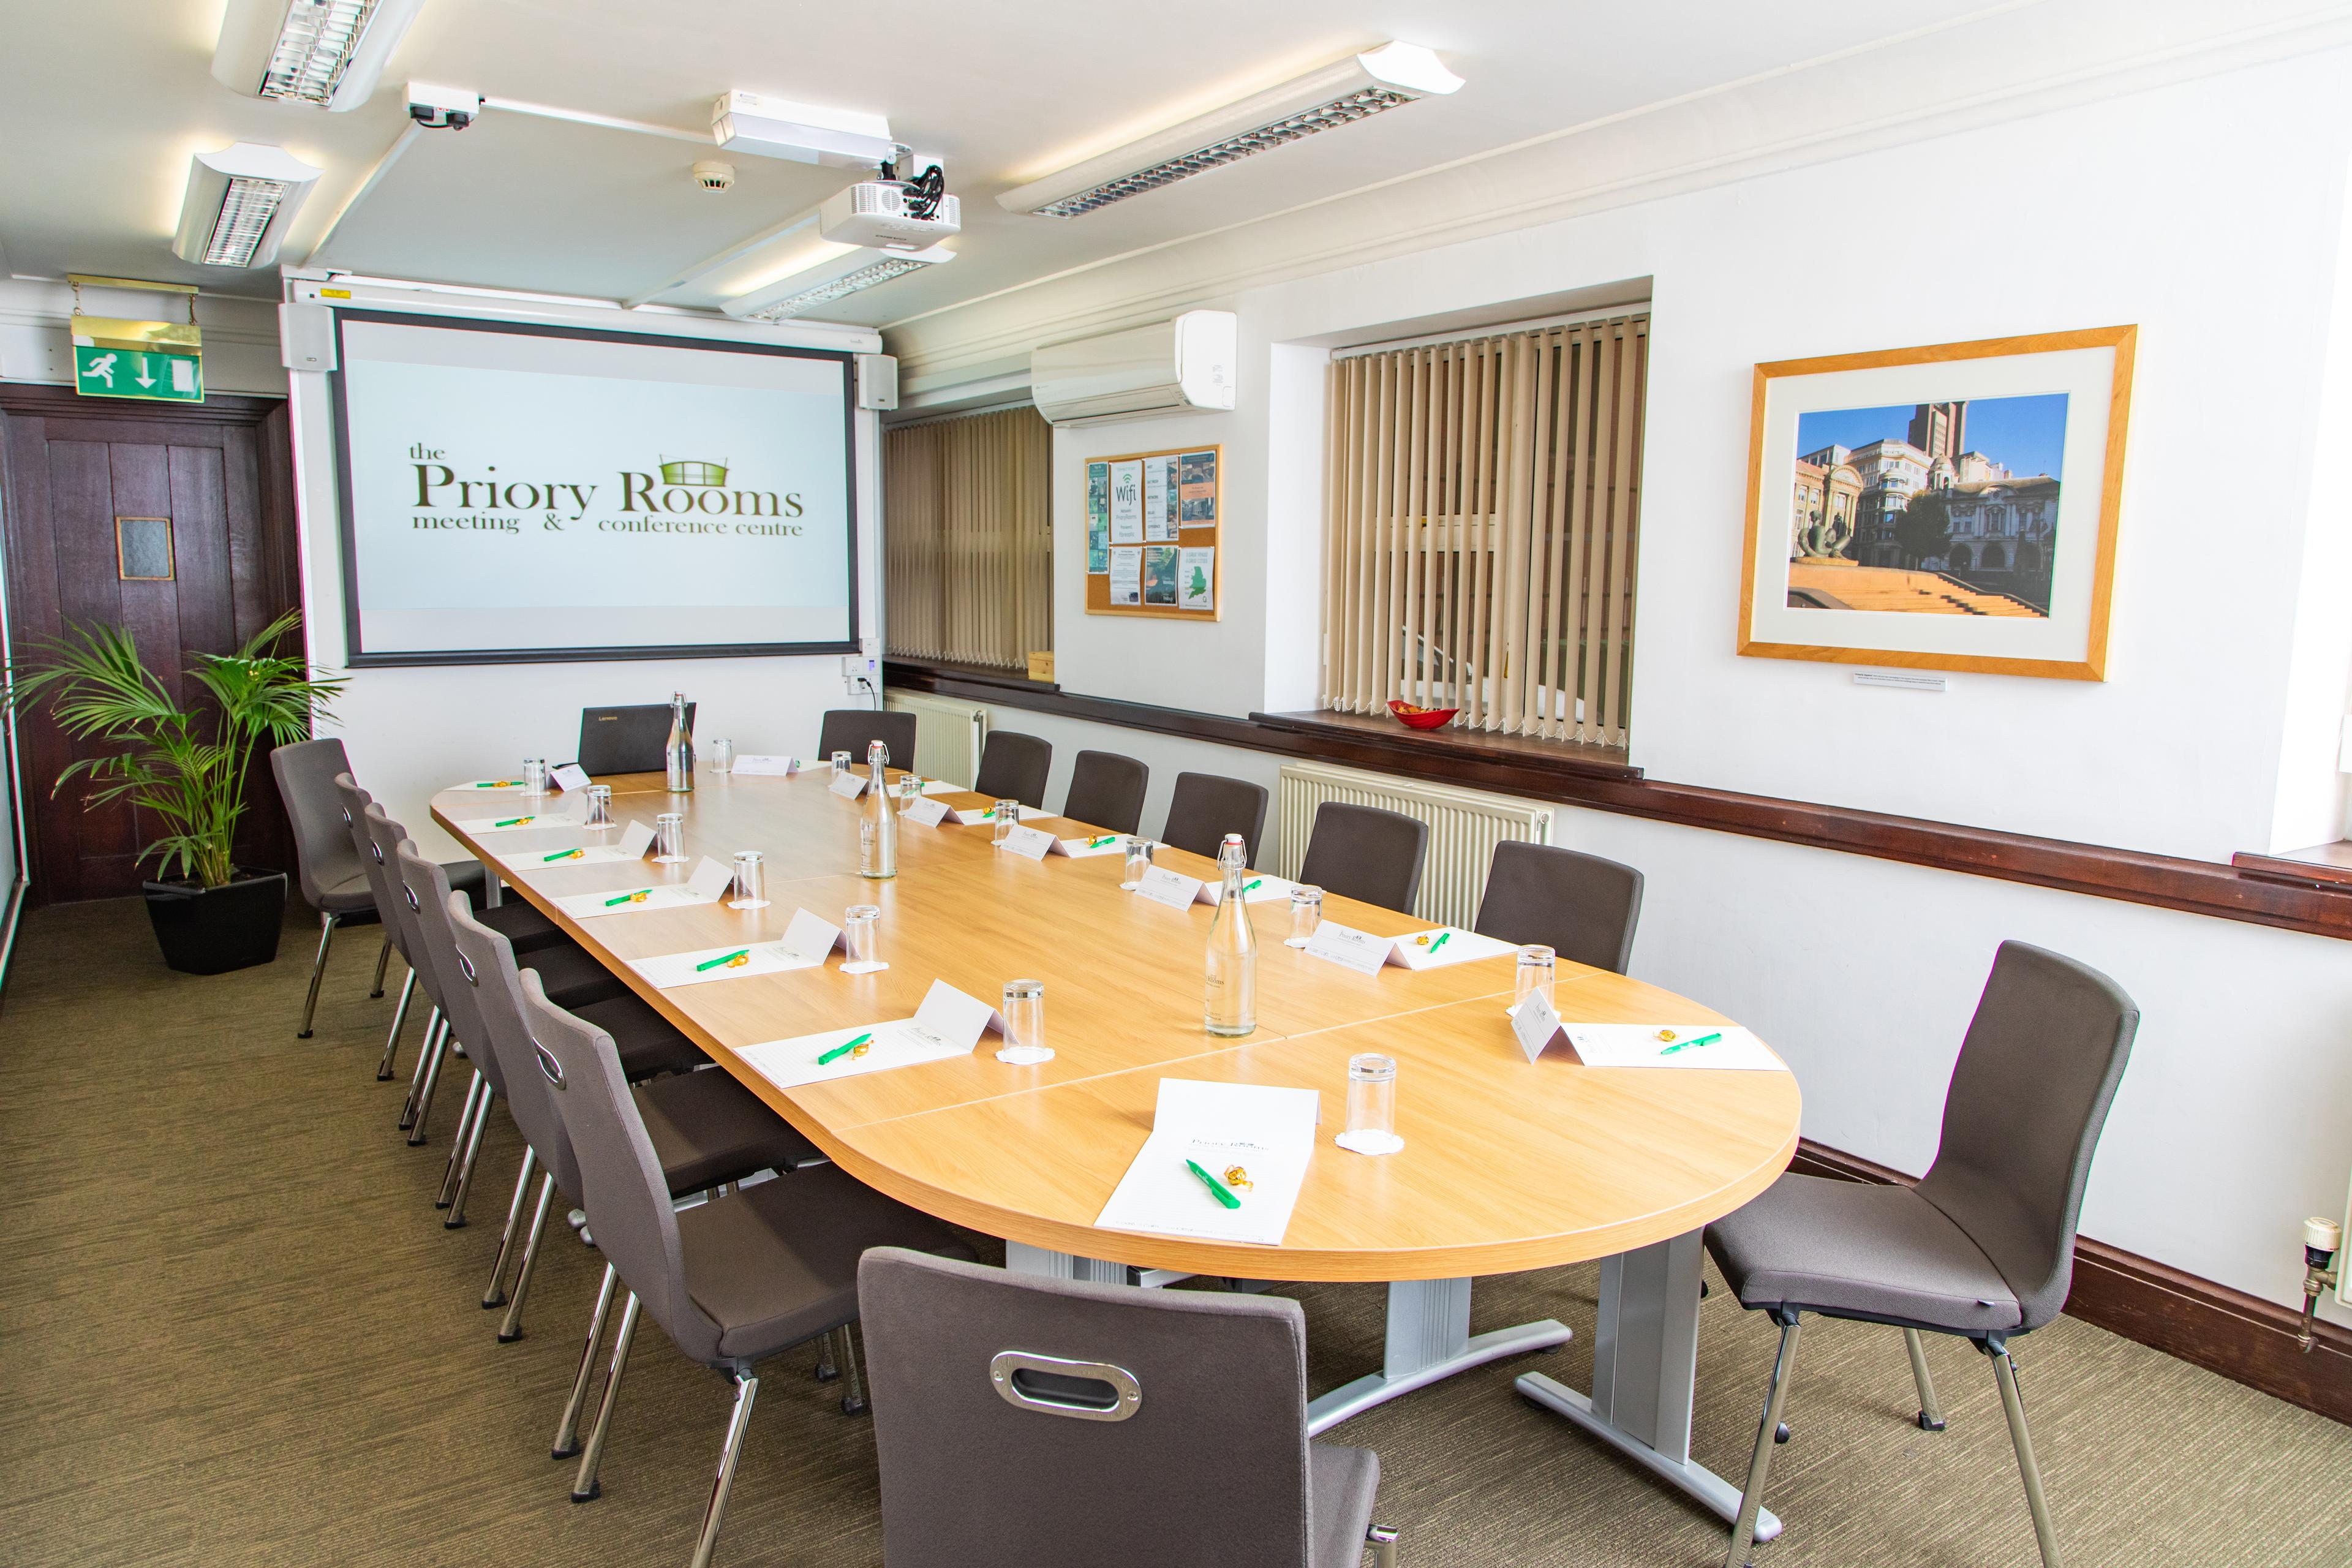 The Priory Rooms Meeting & Conference Centre, Lloyd Room photo #0